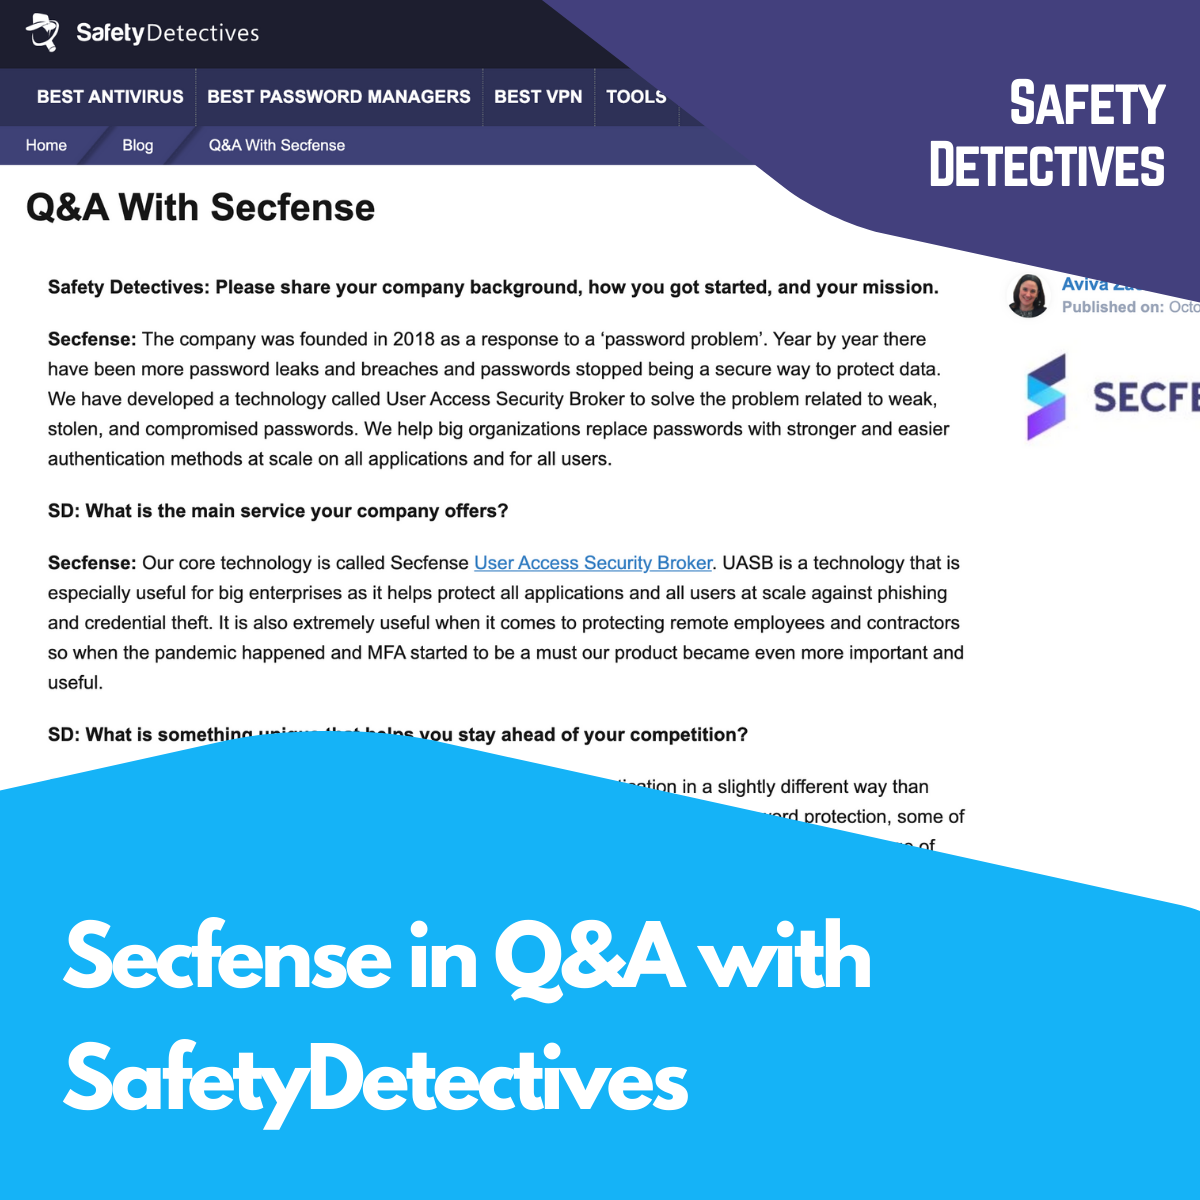 Secfense in Q&A with SafetyDetectives